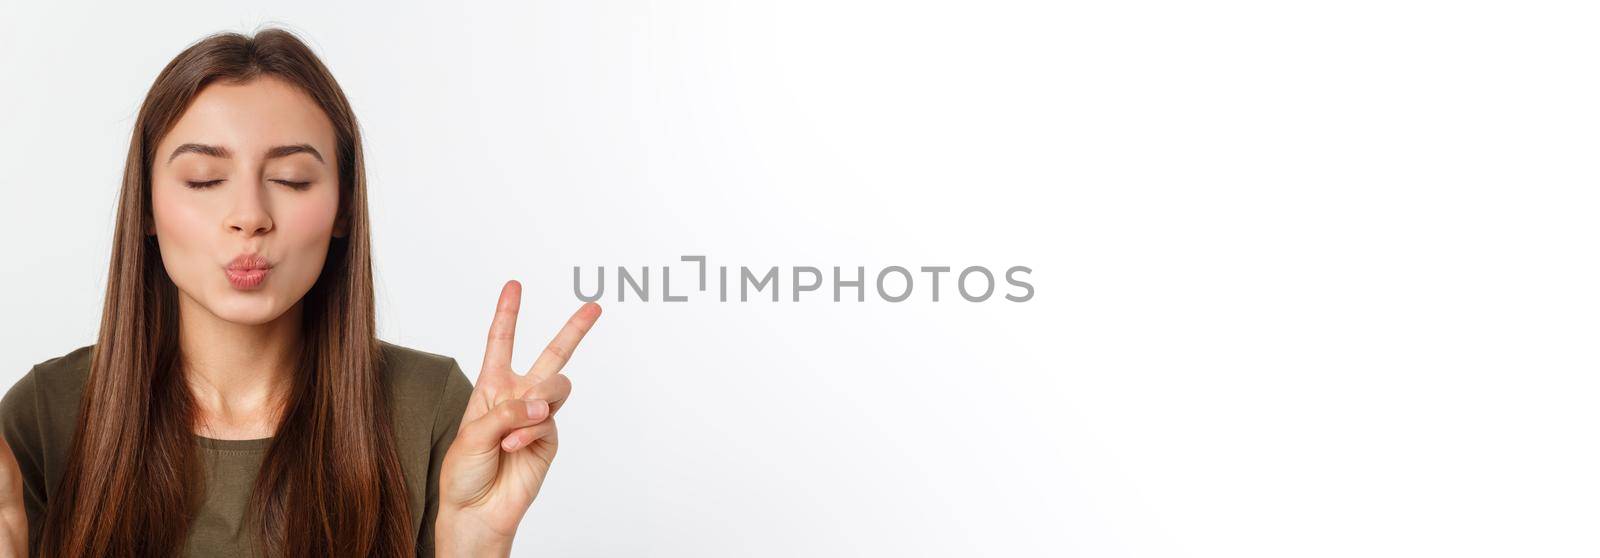 Young woman showing two fingers, positive or peace gesture, on white. by Benzoix